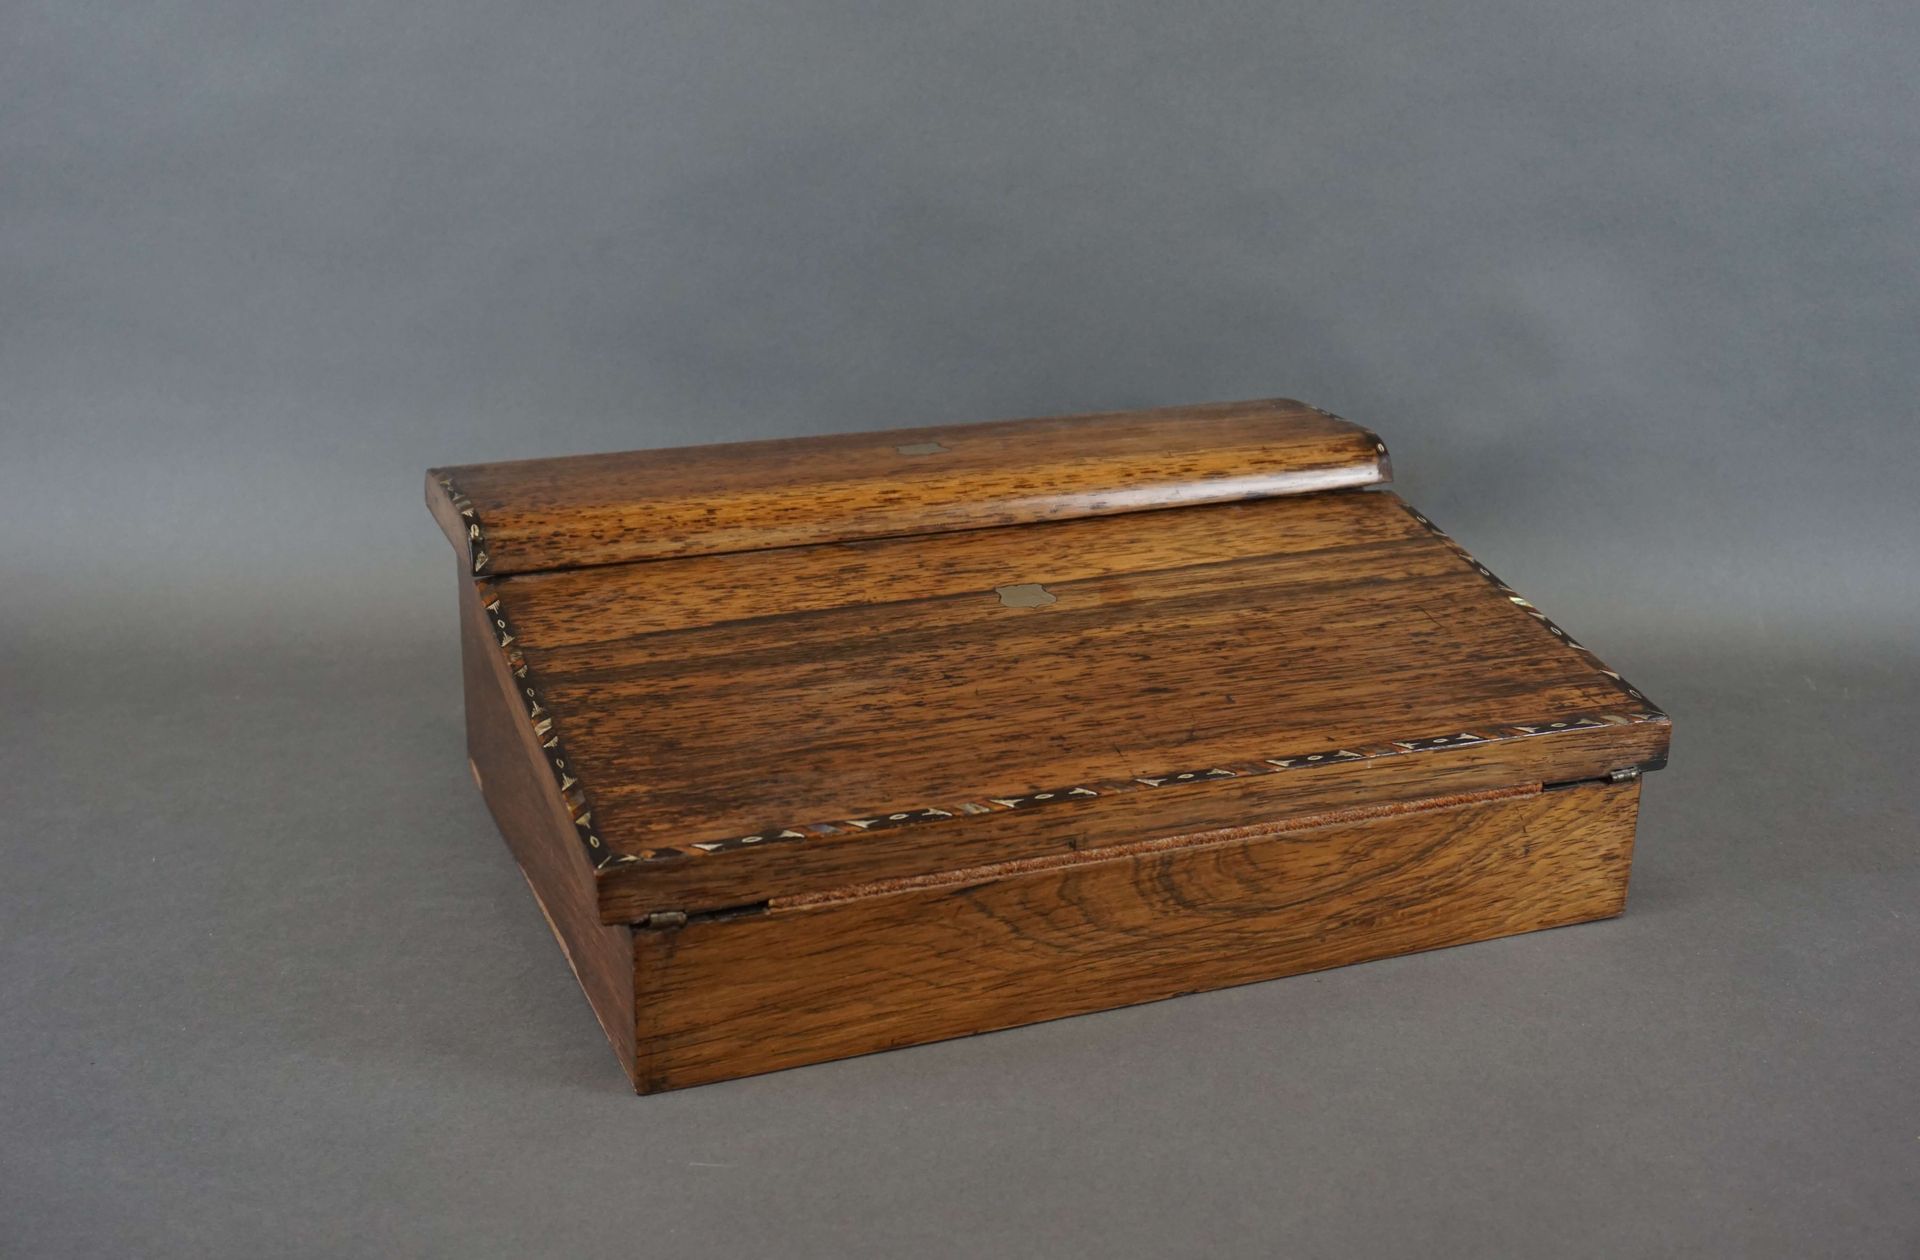 Null Writing desk in rosewood with mother-of-pearl inlays. 35x28 cm